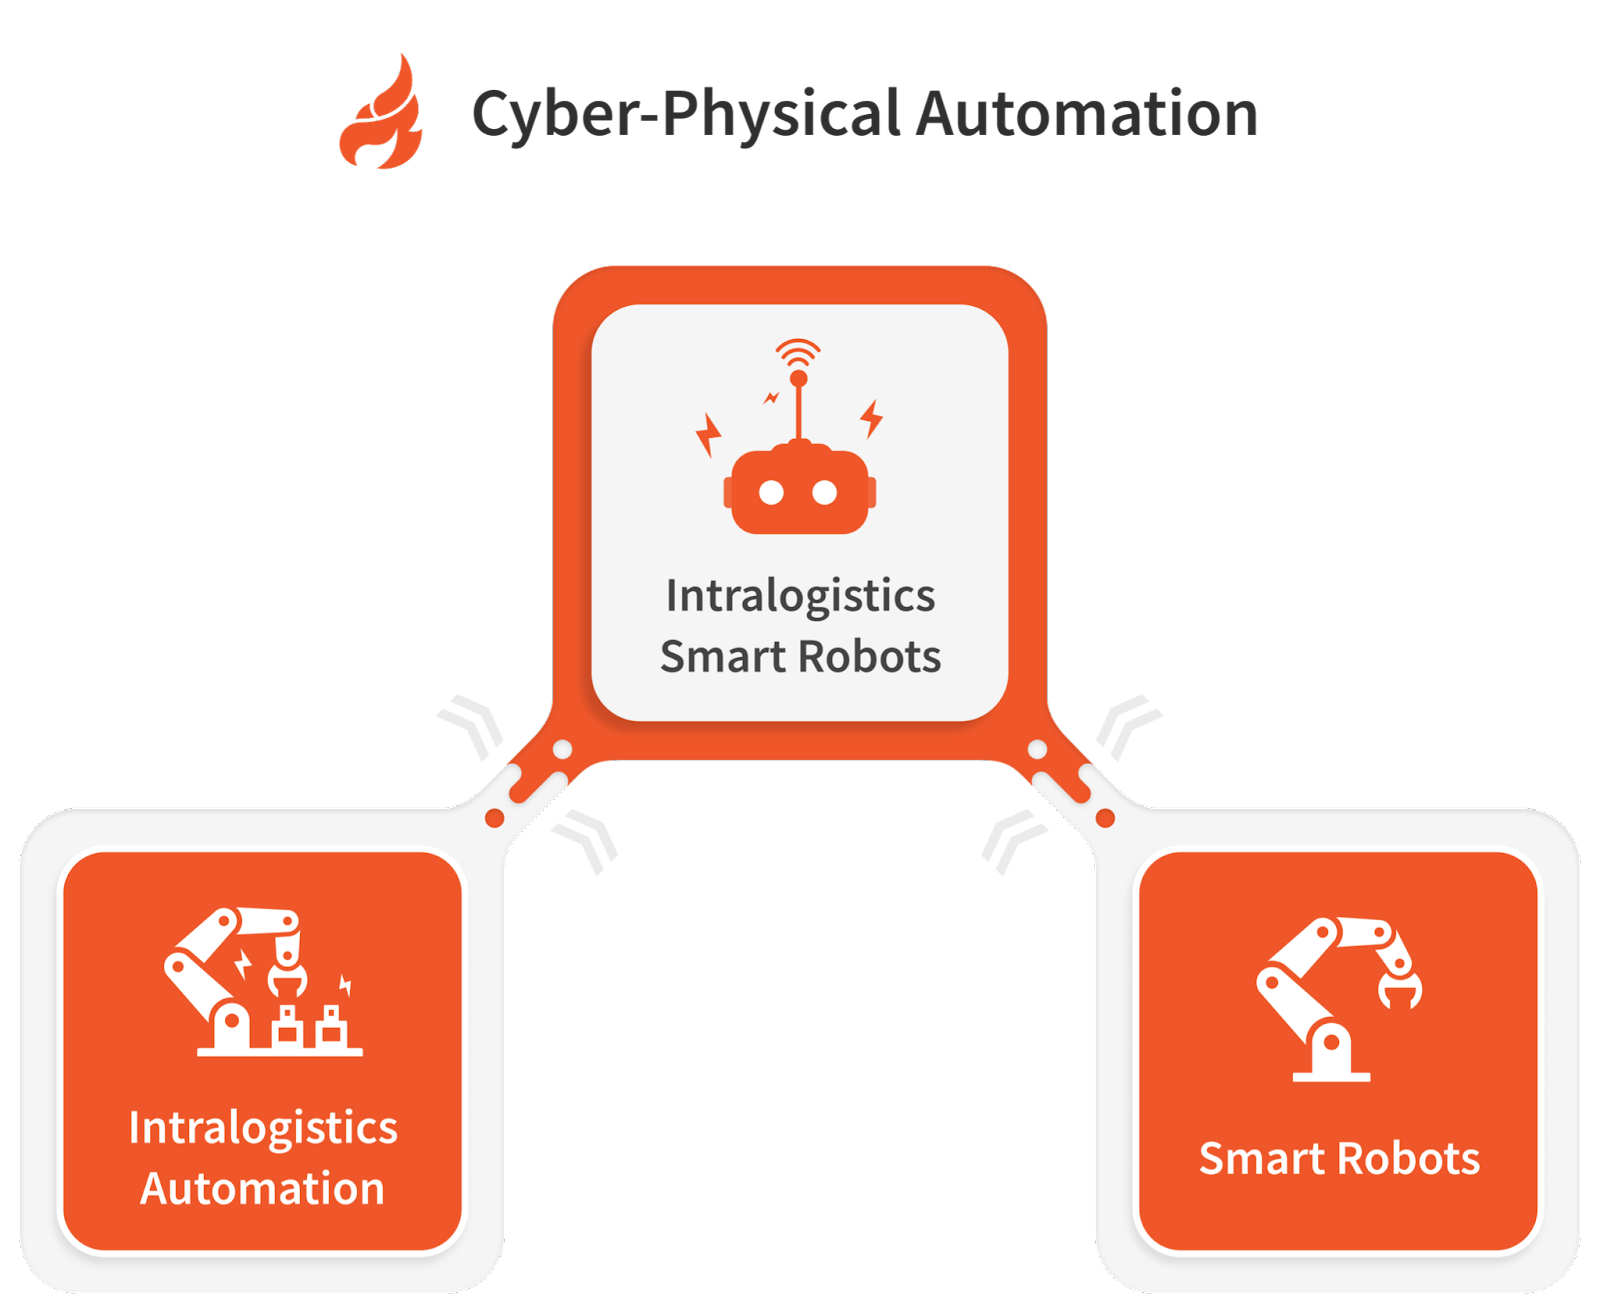 Cyber-Physical Automation